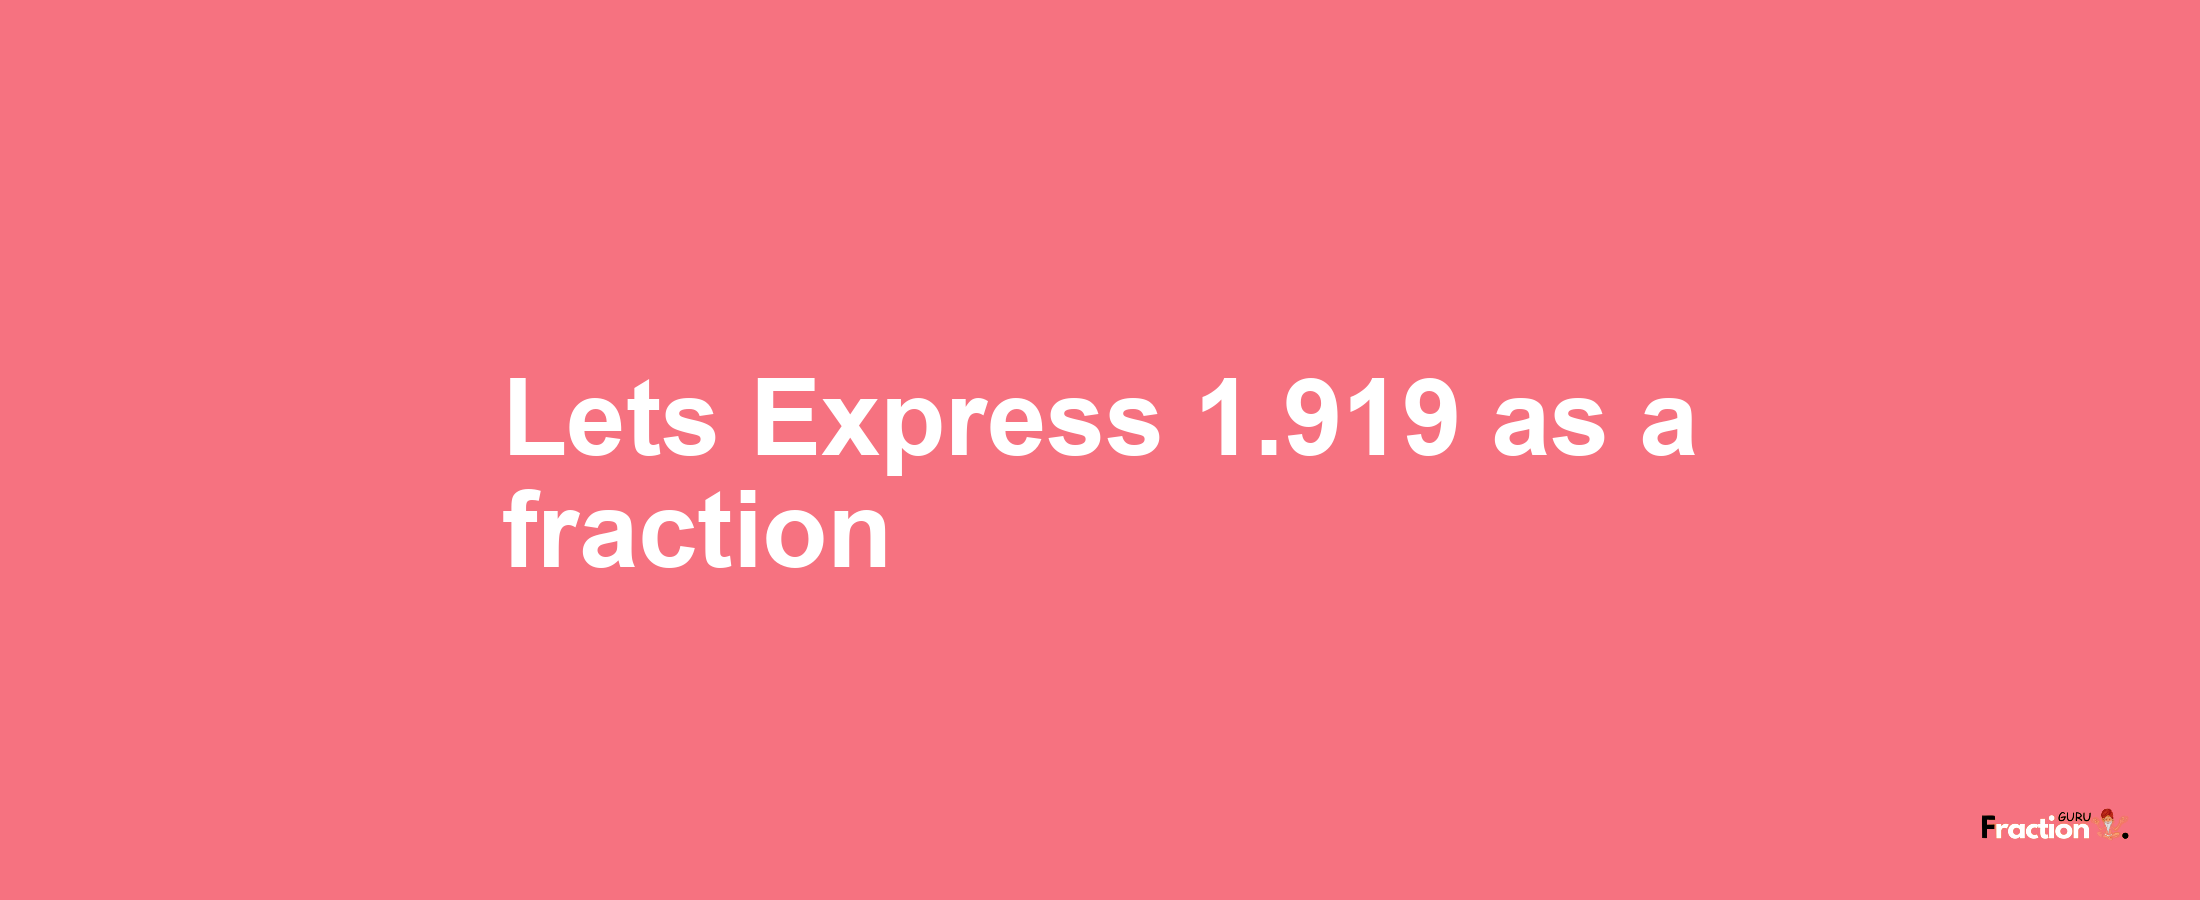 Lets Express 1.919 as afraction